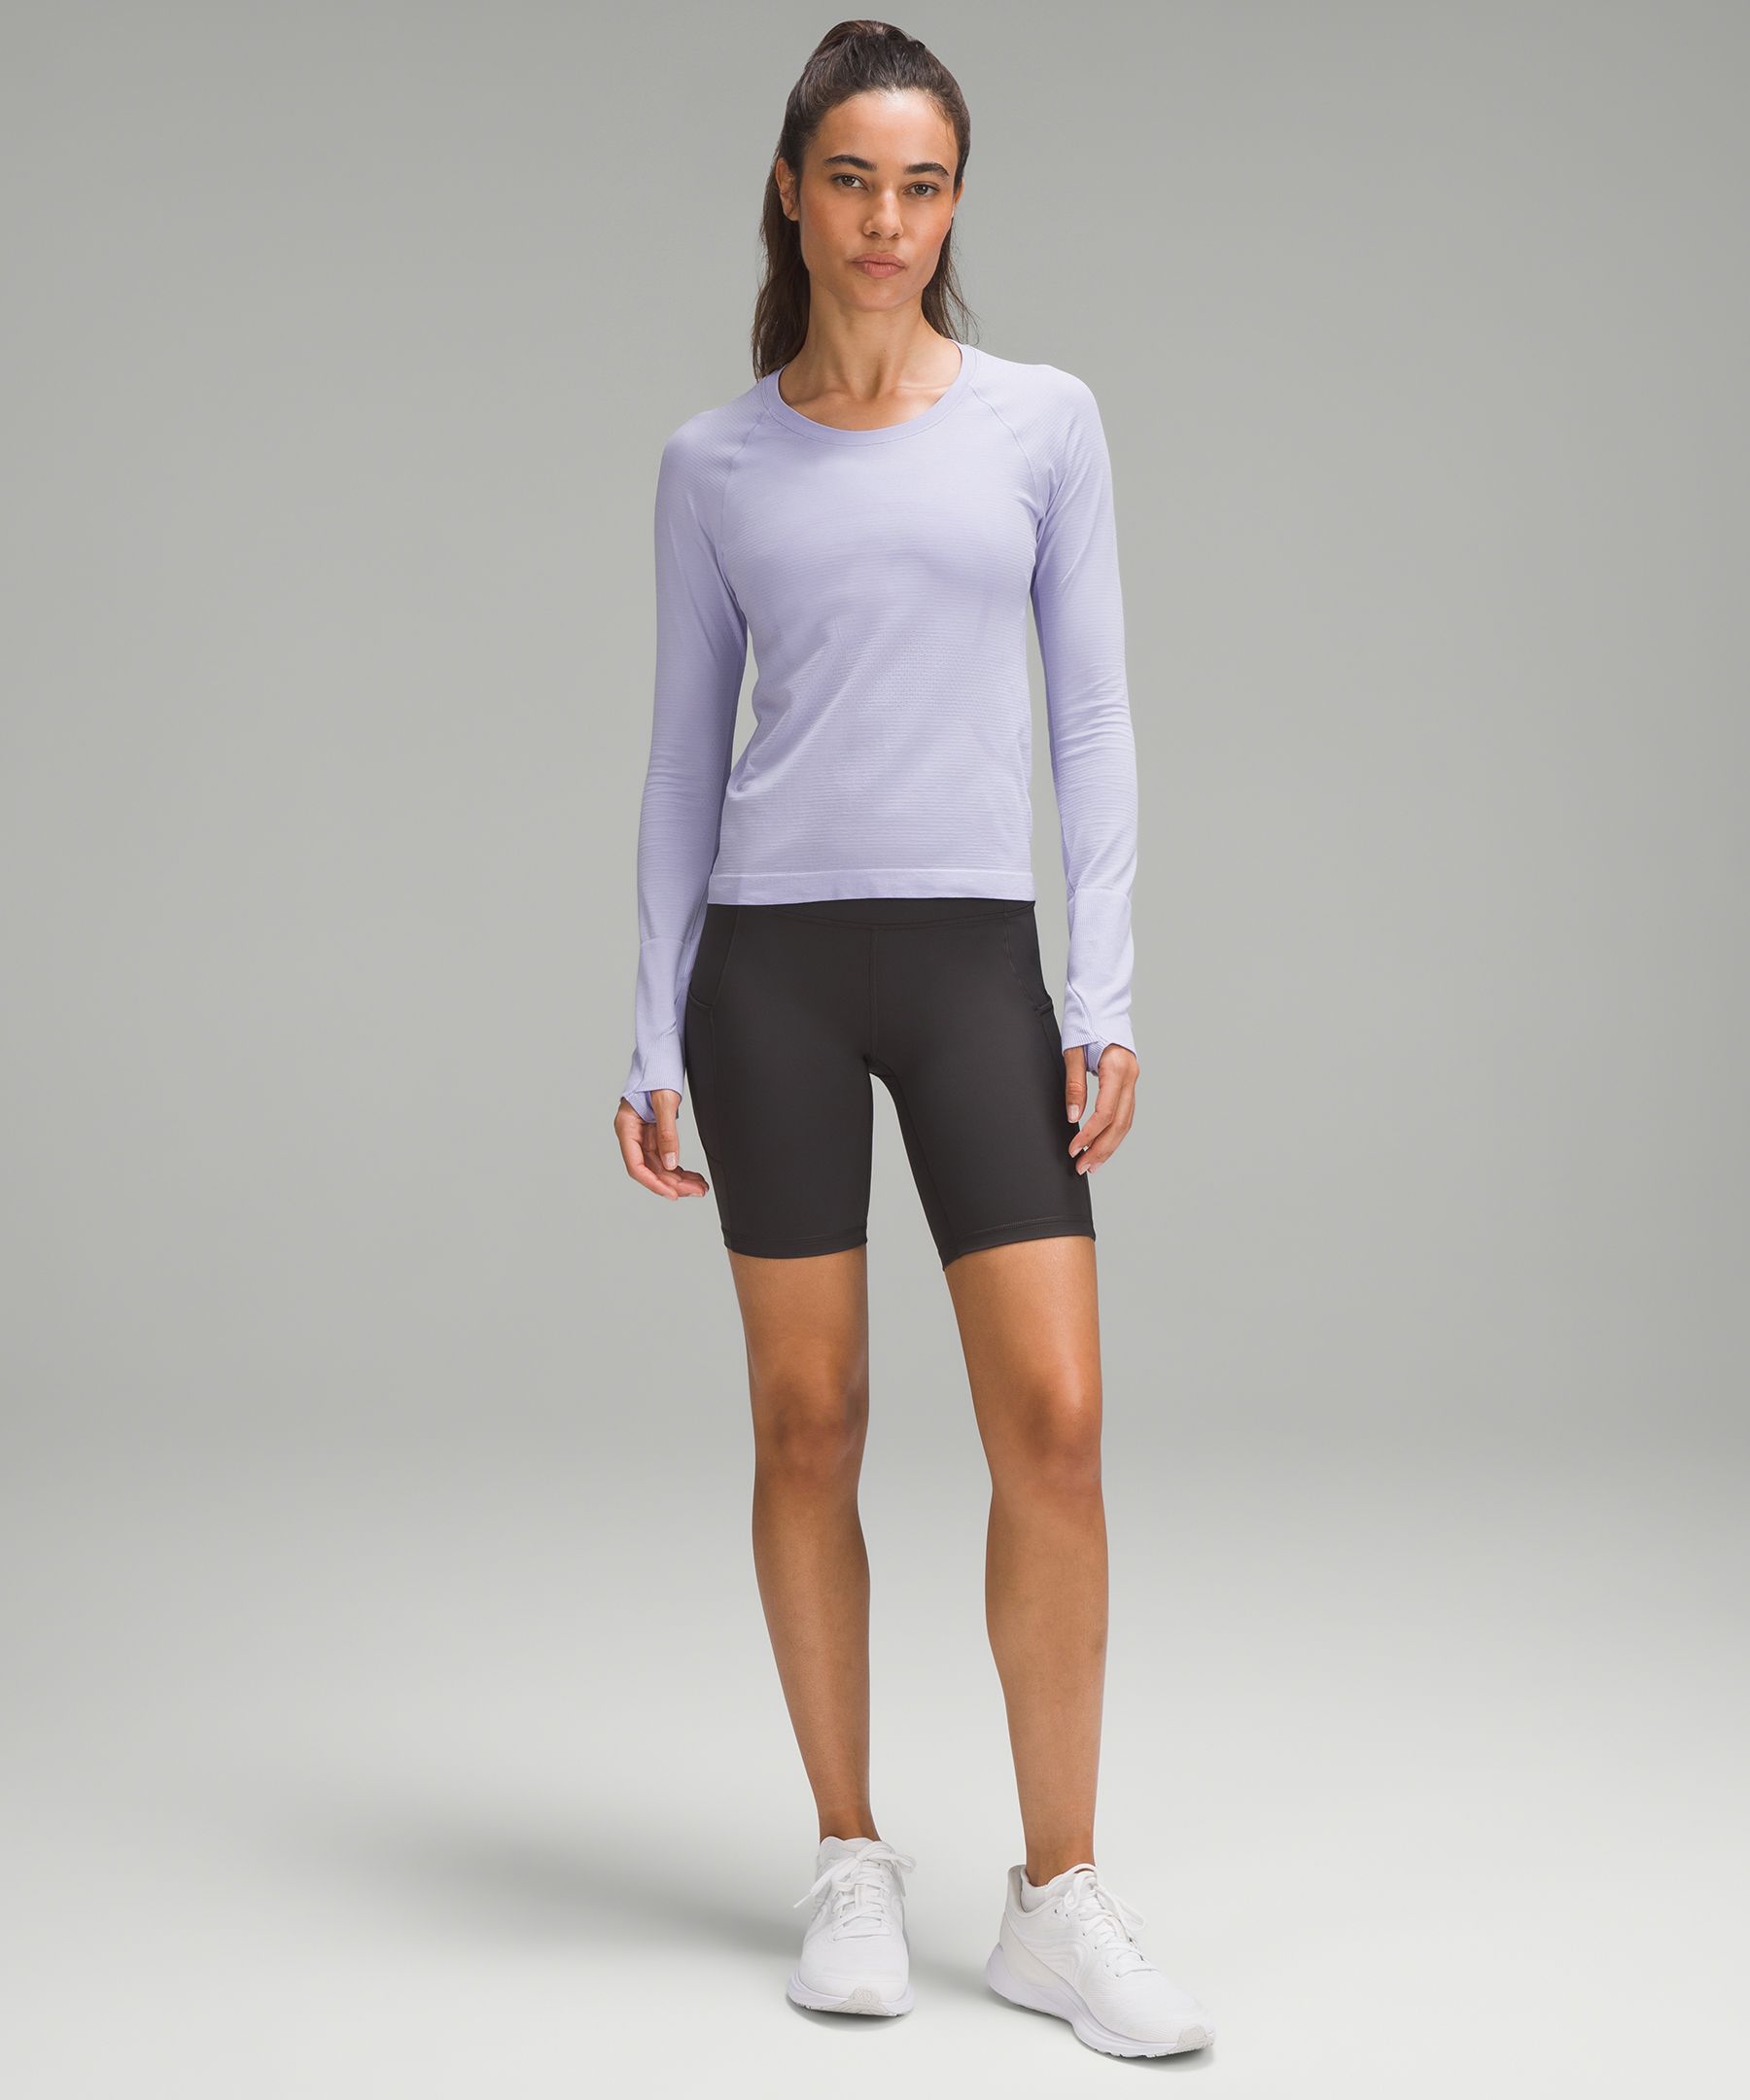 Watch Window on long sleeves? ; Would you be for or against having watch  windows on long sleeves for running? i.e. swiftly tech long sleeve : r/ lululemon